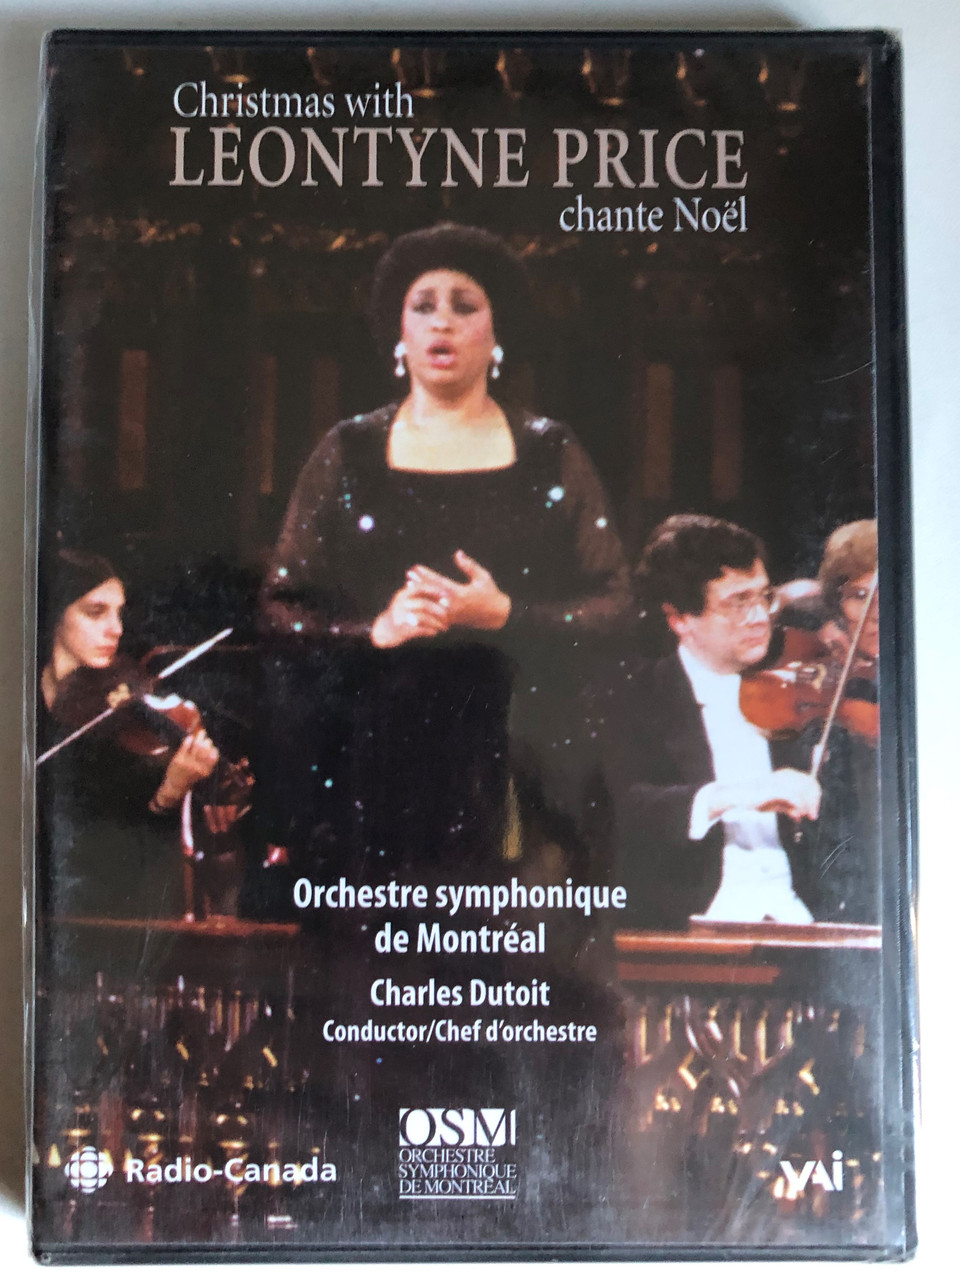 Christmas_With_Leontyne_Price_Charles_Dutoit_Montreal_Symphony_Montral_Symphony_Orchestra_under_the_baton_of_Charles_Dutoit_Leontyne_Price_soprano_Orchestre_symphonique_d___11503.1691899121.1280.1280.JPG (960×1280)